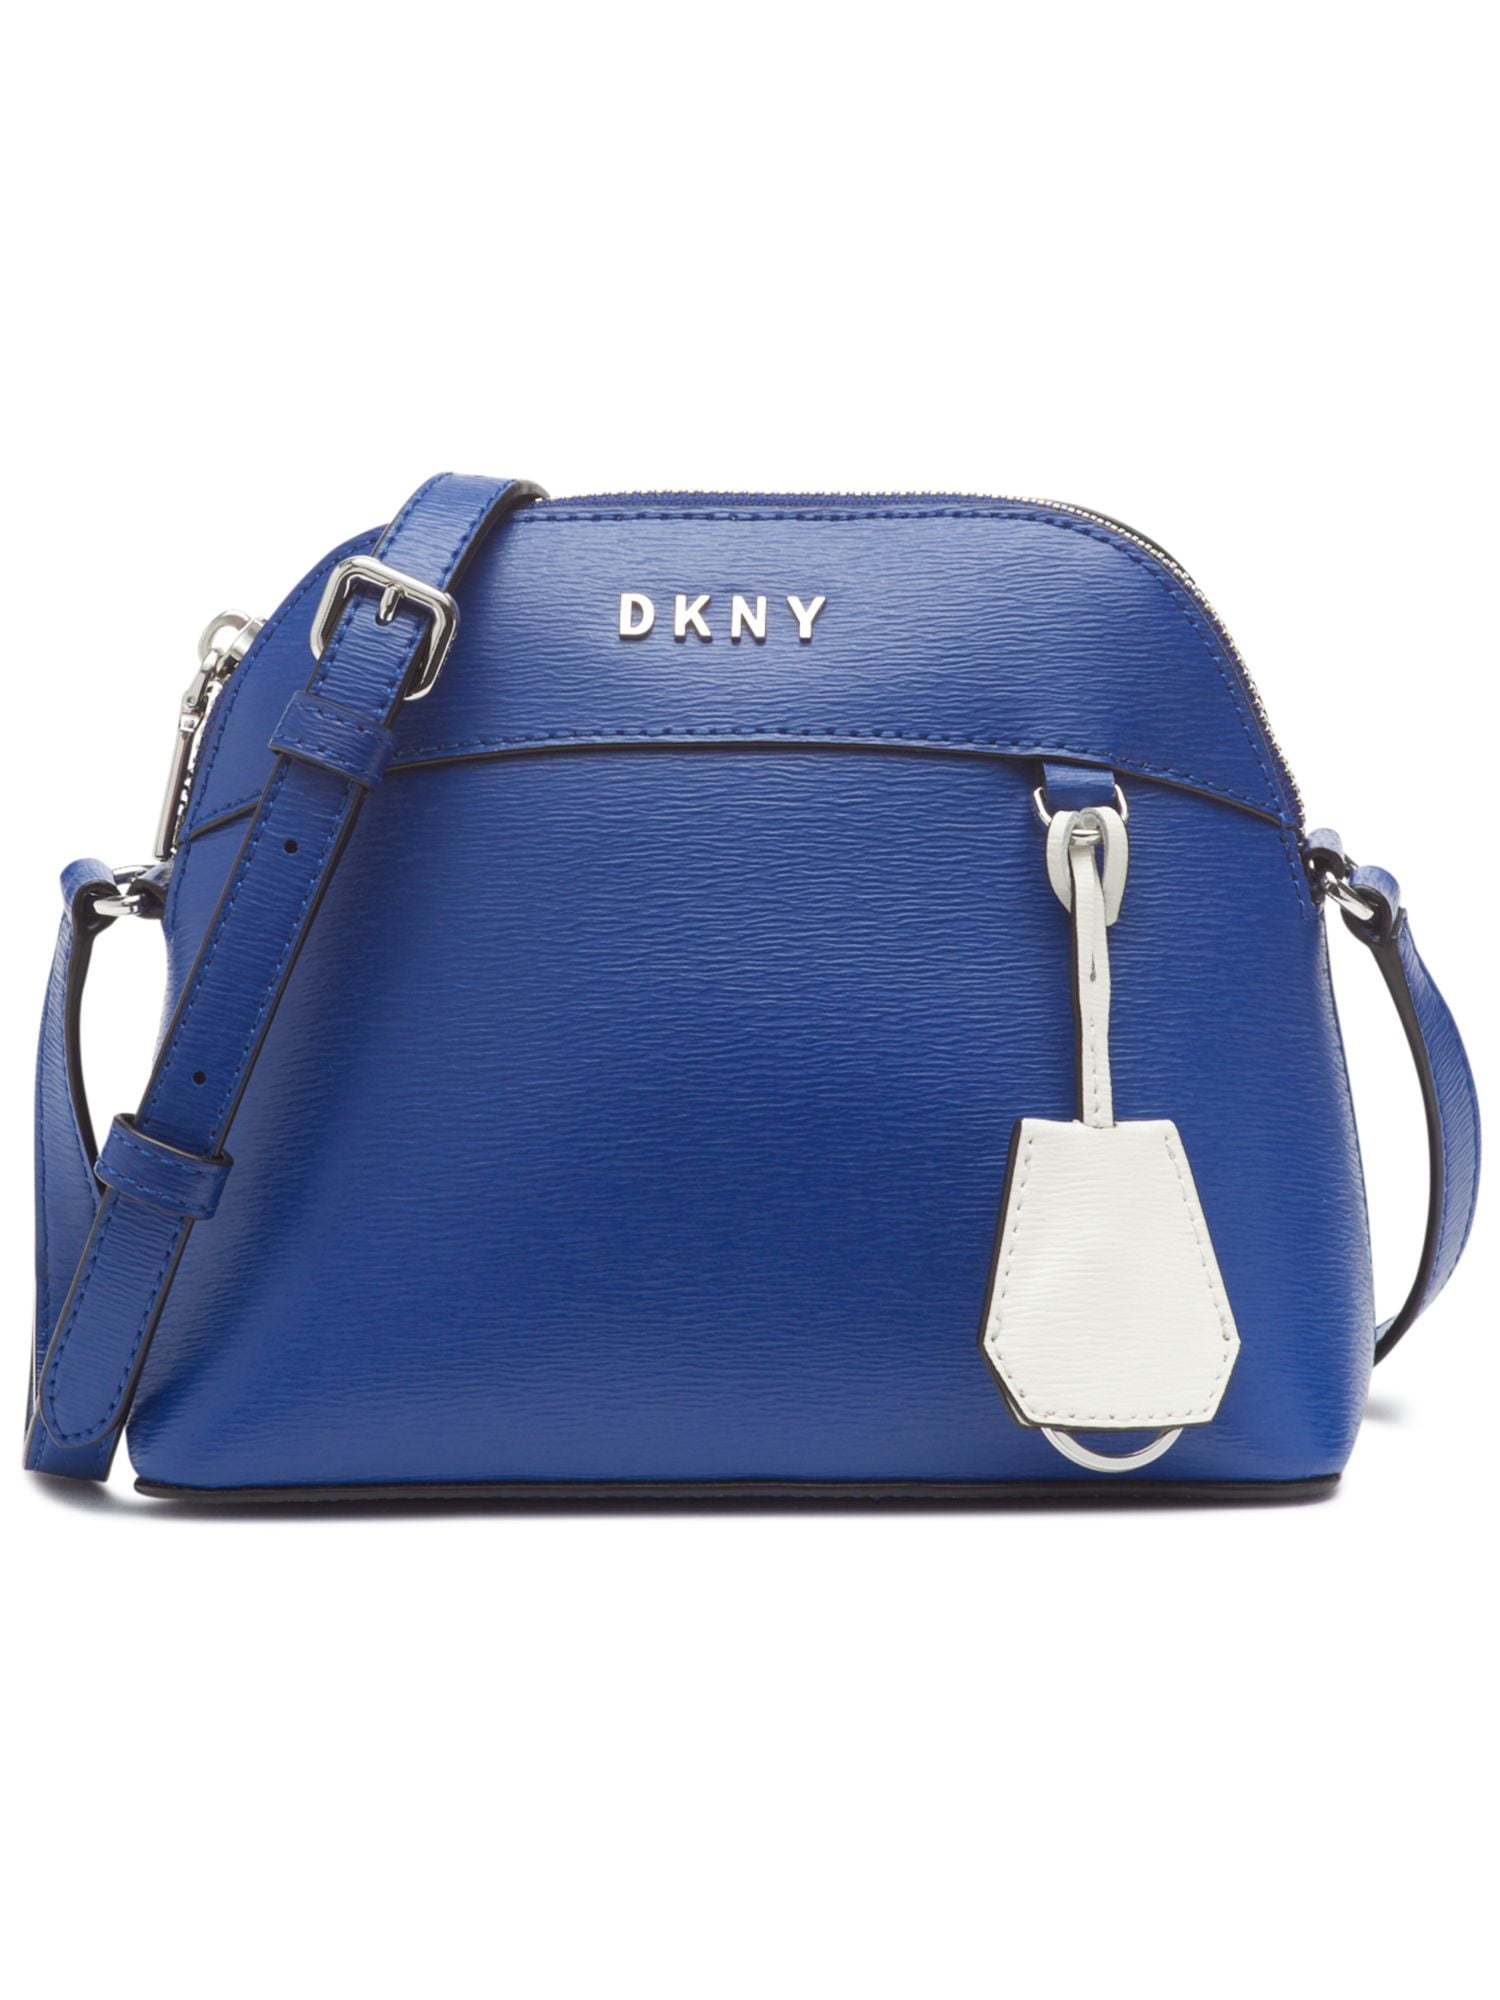 Dkny | Bags | Dkny Blue Leather Purse With Gold Chain Strap | Poshmark